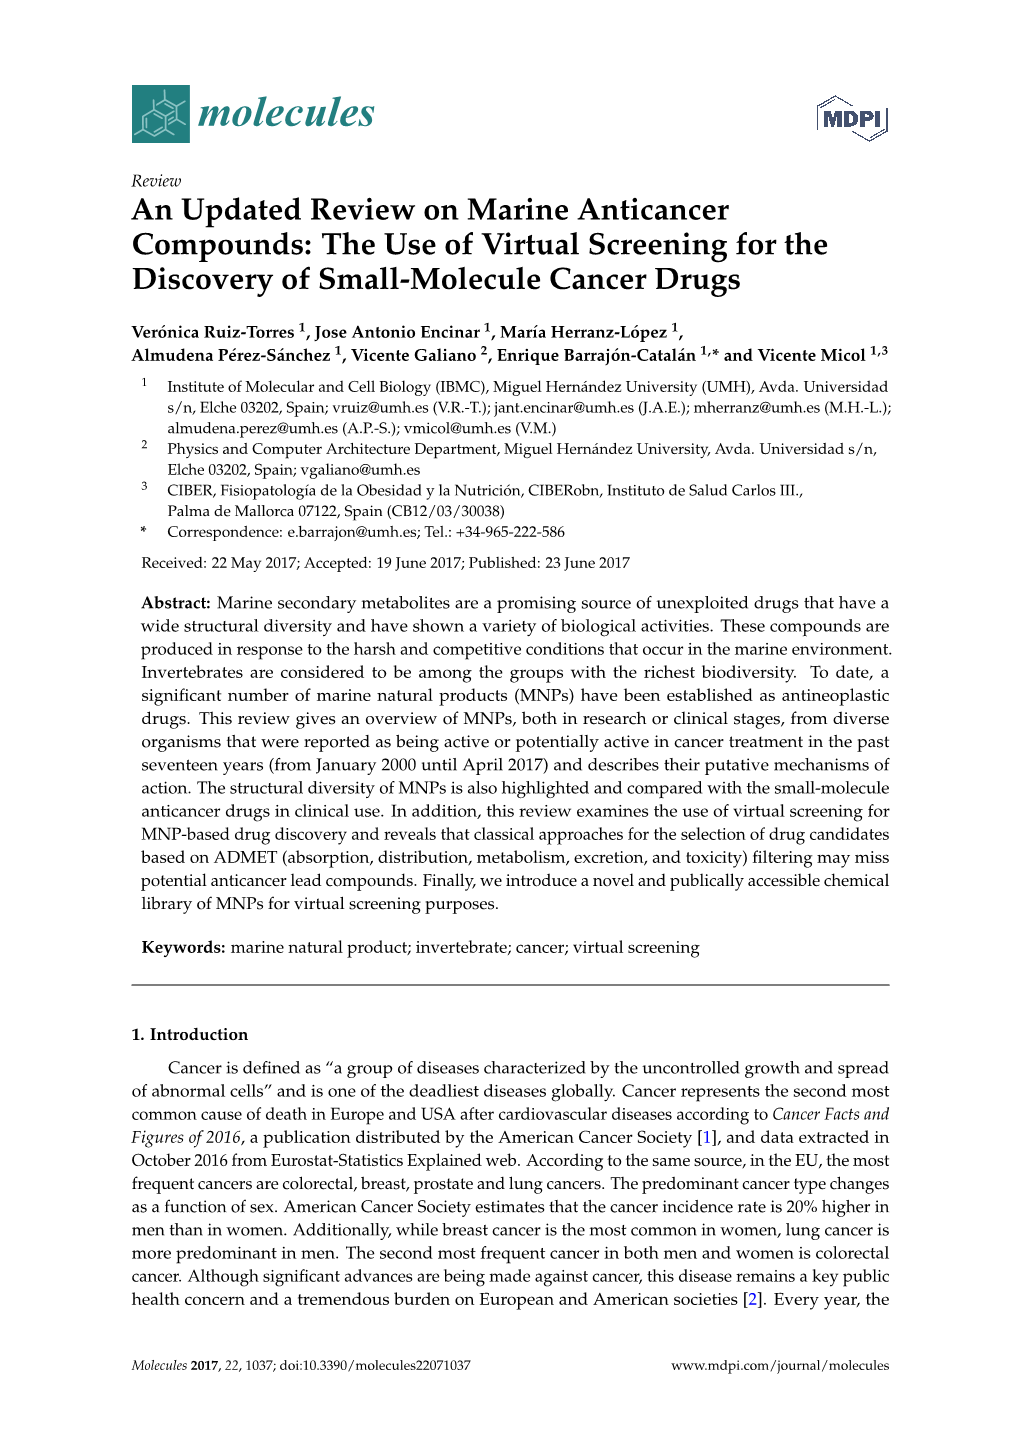 An Updated Review on Marine Anticancer Compounds: the Use of Virtual Screening for the Discovery of Small-Molecule Cancer Drugs